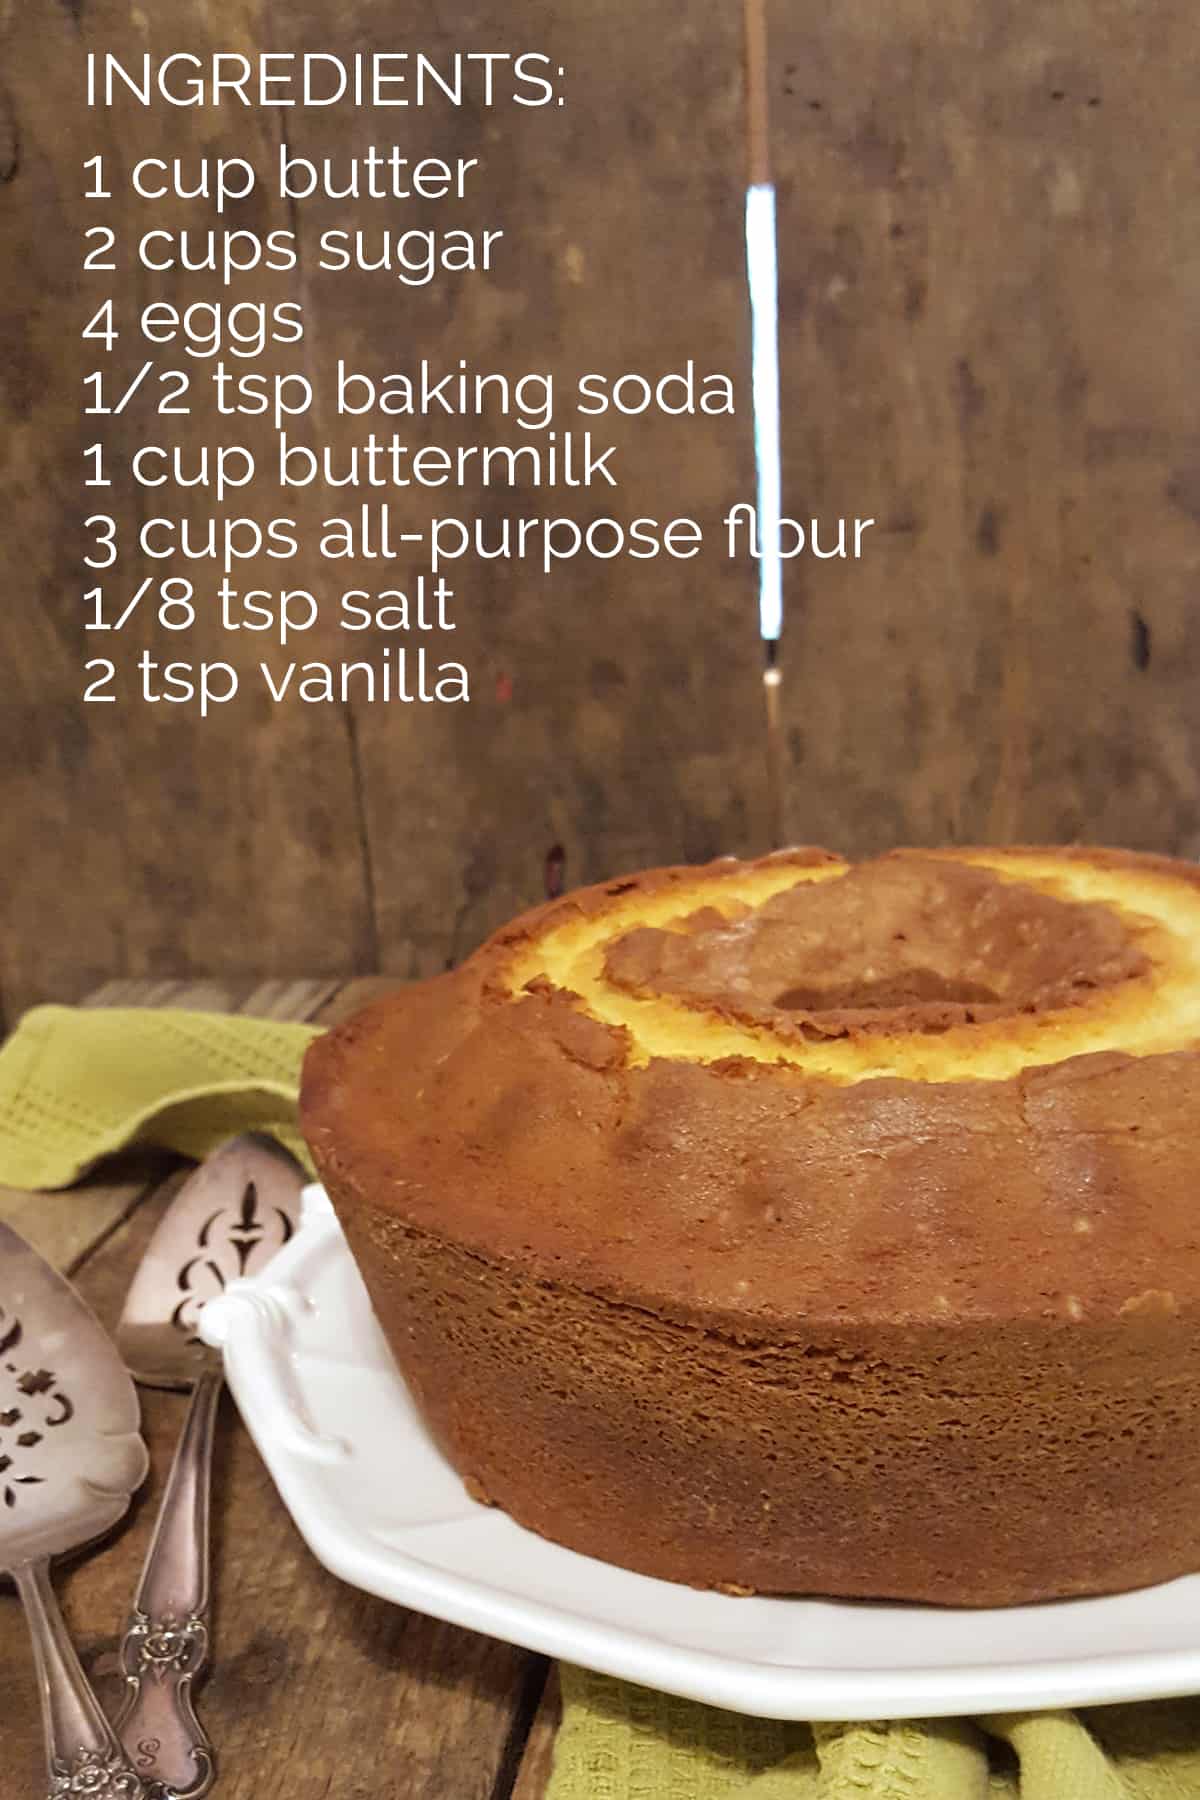 Ingredients needed to make the pound cake.